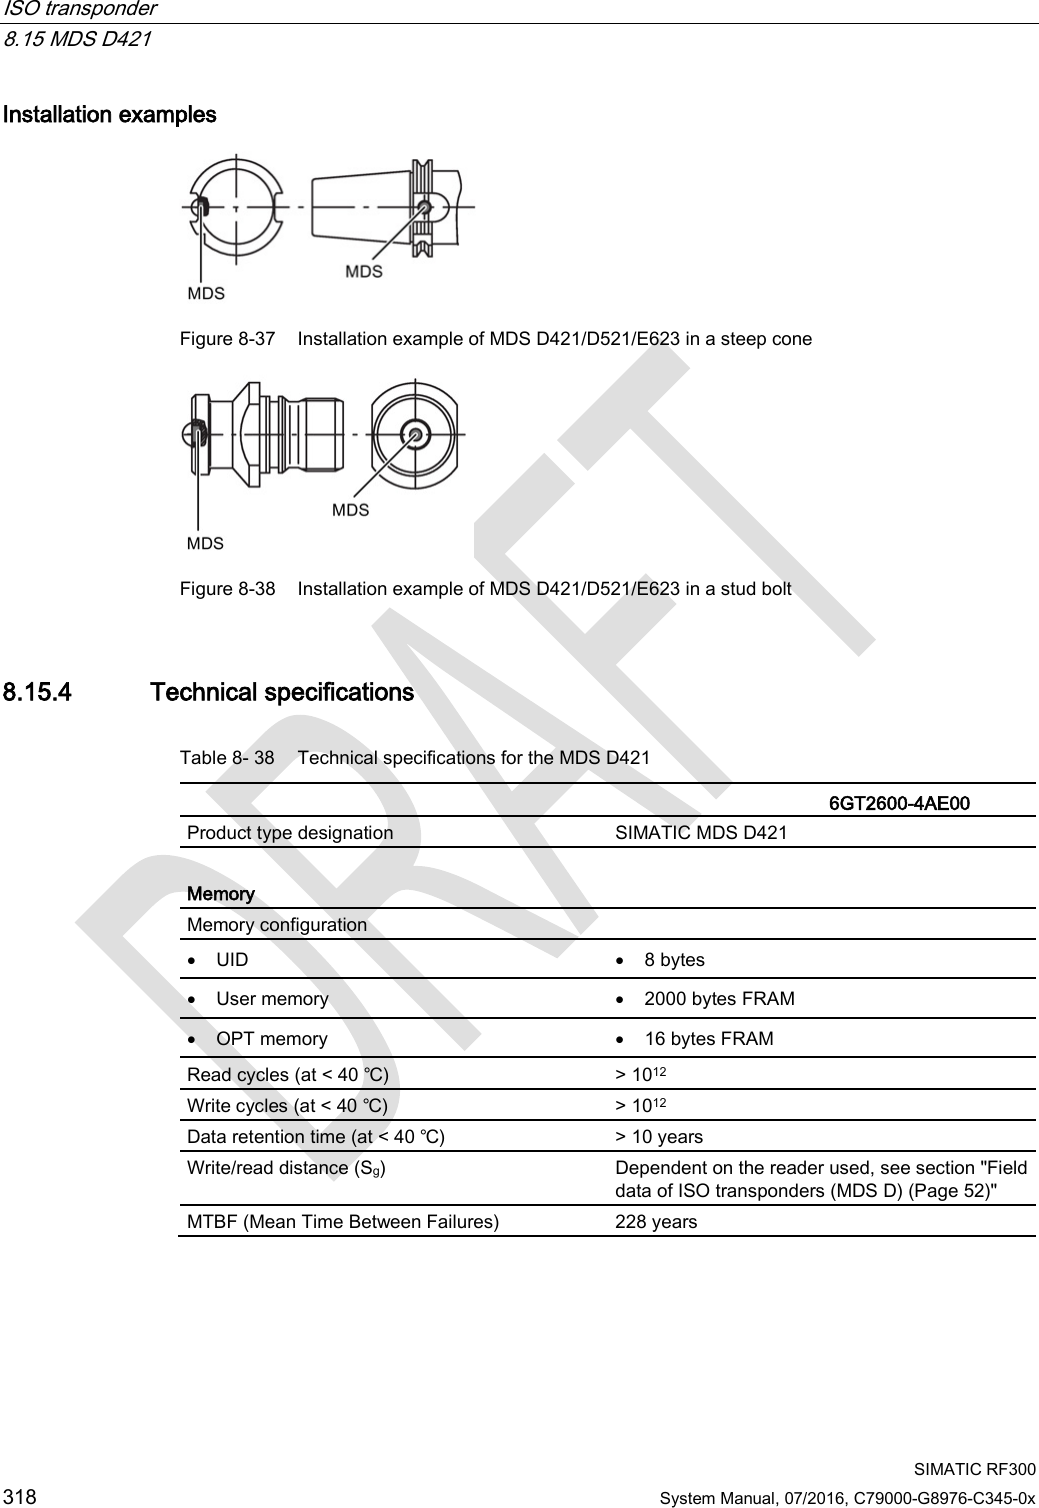 ISO transponder   8.15 MDS D421  SIMATIC RF300 318 System Manual, 07/2016, C79000-G8976-C345-0x Installation examples  Figure 8-37 Installation example of MDS D421/D521/E623 in a steep cone  Figure 8-38 Installation example of MDS D421/D521/E623 in a stud bolt 8.15.4 Technical specifications Table 8- 38 Technical specifications for the MDS D421    6GT2600-4AE00  Product type designation SIMATIC MDS D421  Memory Memory configuration  • UID • 8 bytes • User memory • 2000 bytes FRAM • OPT memory • 16 bytes FRAM Read cycles (at &lt; 40 ℃) &gt; 1012 Write cycles (at &lt; 40 ℃) &gt; 1012 Data retention time (at &lt; 40 ℃) &gt; 10 years Write/read distance (Sg)  Dependent on the reader used, see section &quot;Field data of ISO transponders (MDS D) (Page 52)&quot; MTBF (Mean Time Between Failures) 228 years 